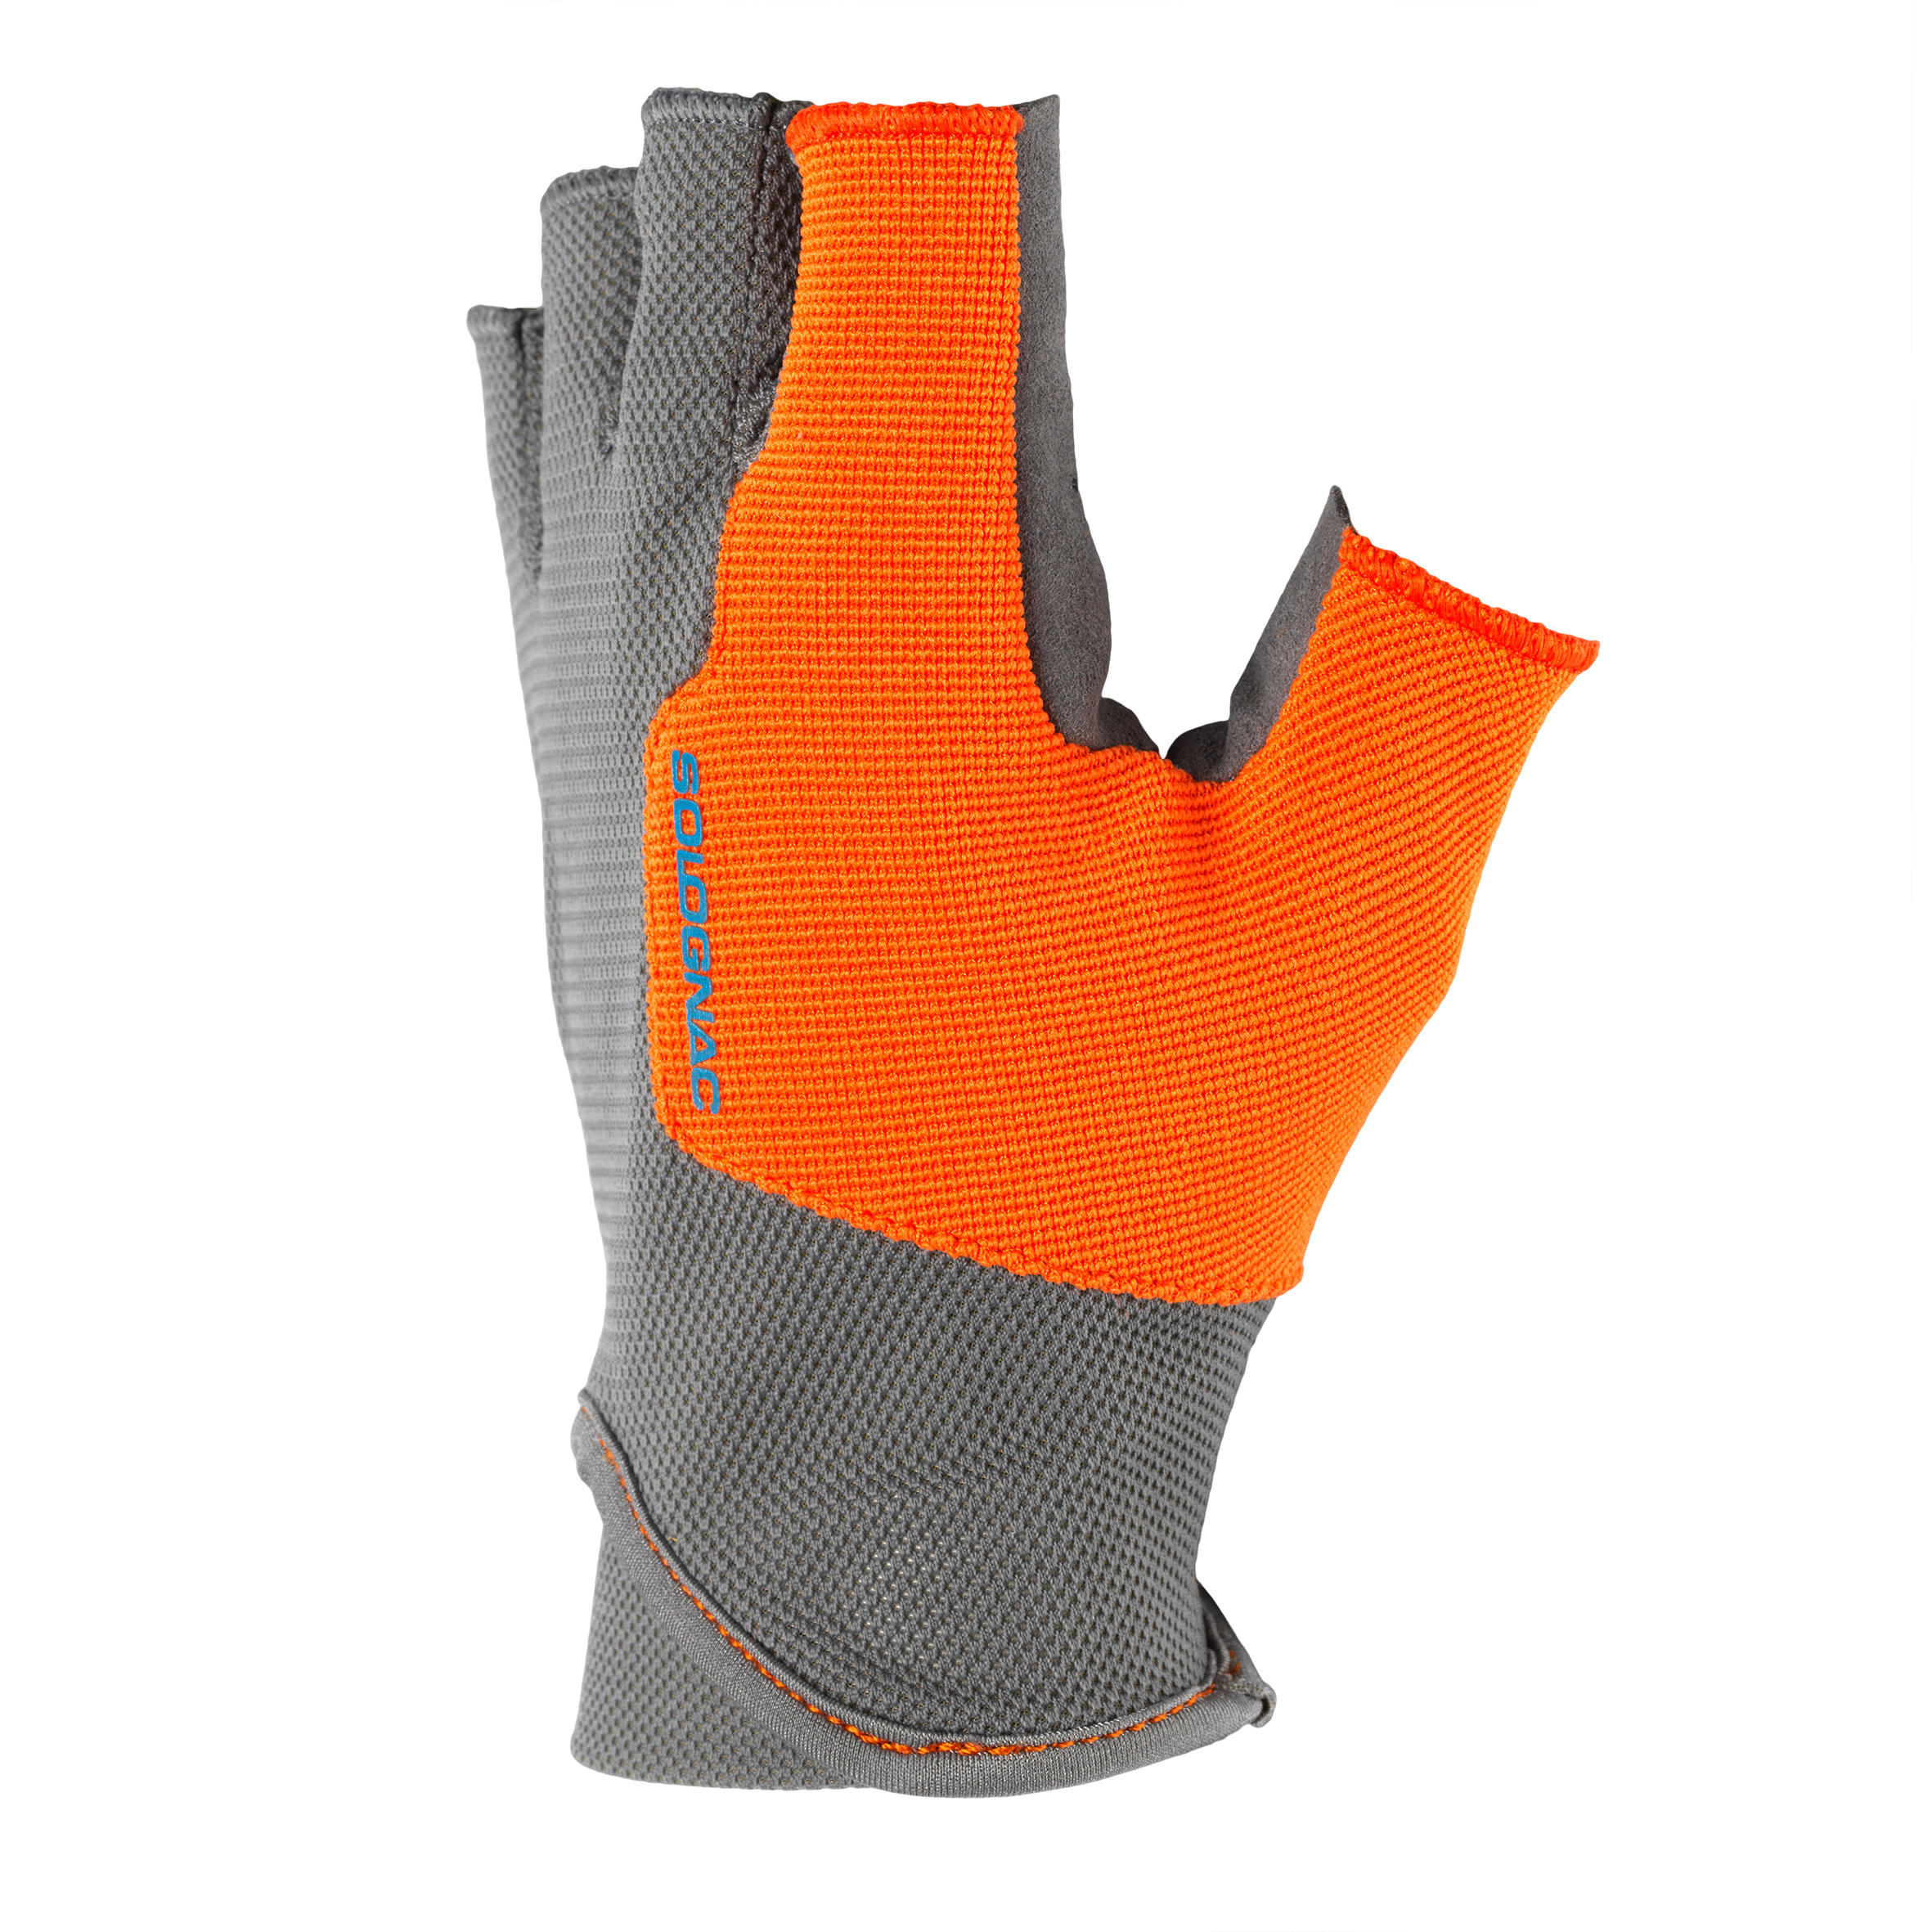 CLAY PIGEON SHOOTING MITTS - GREY, SOLOGNAC 4/9